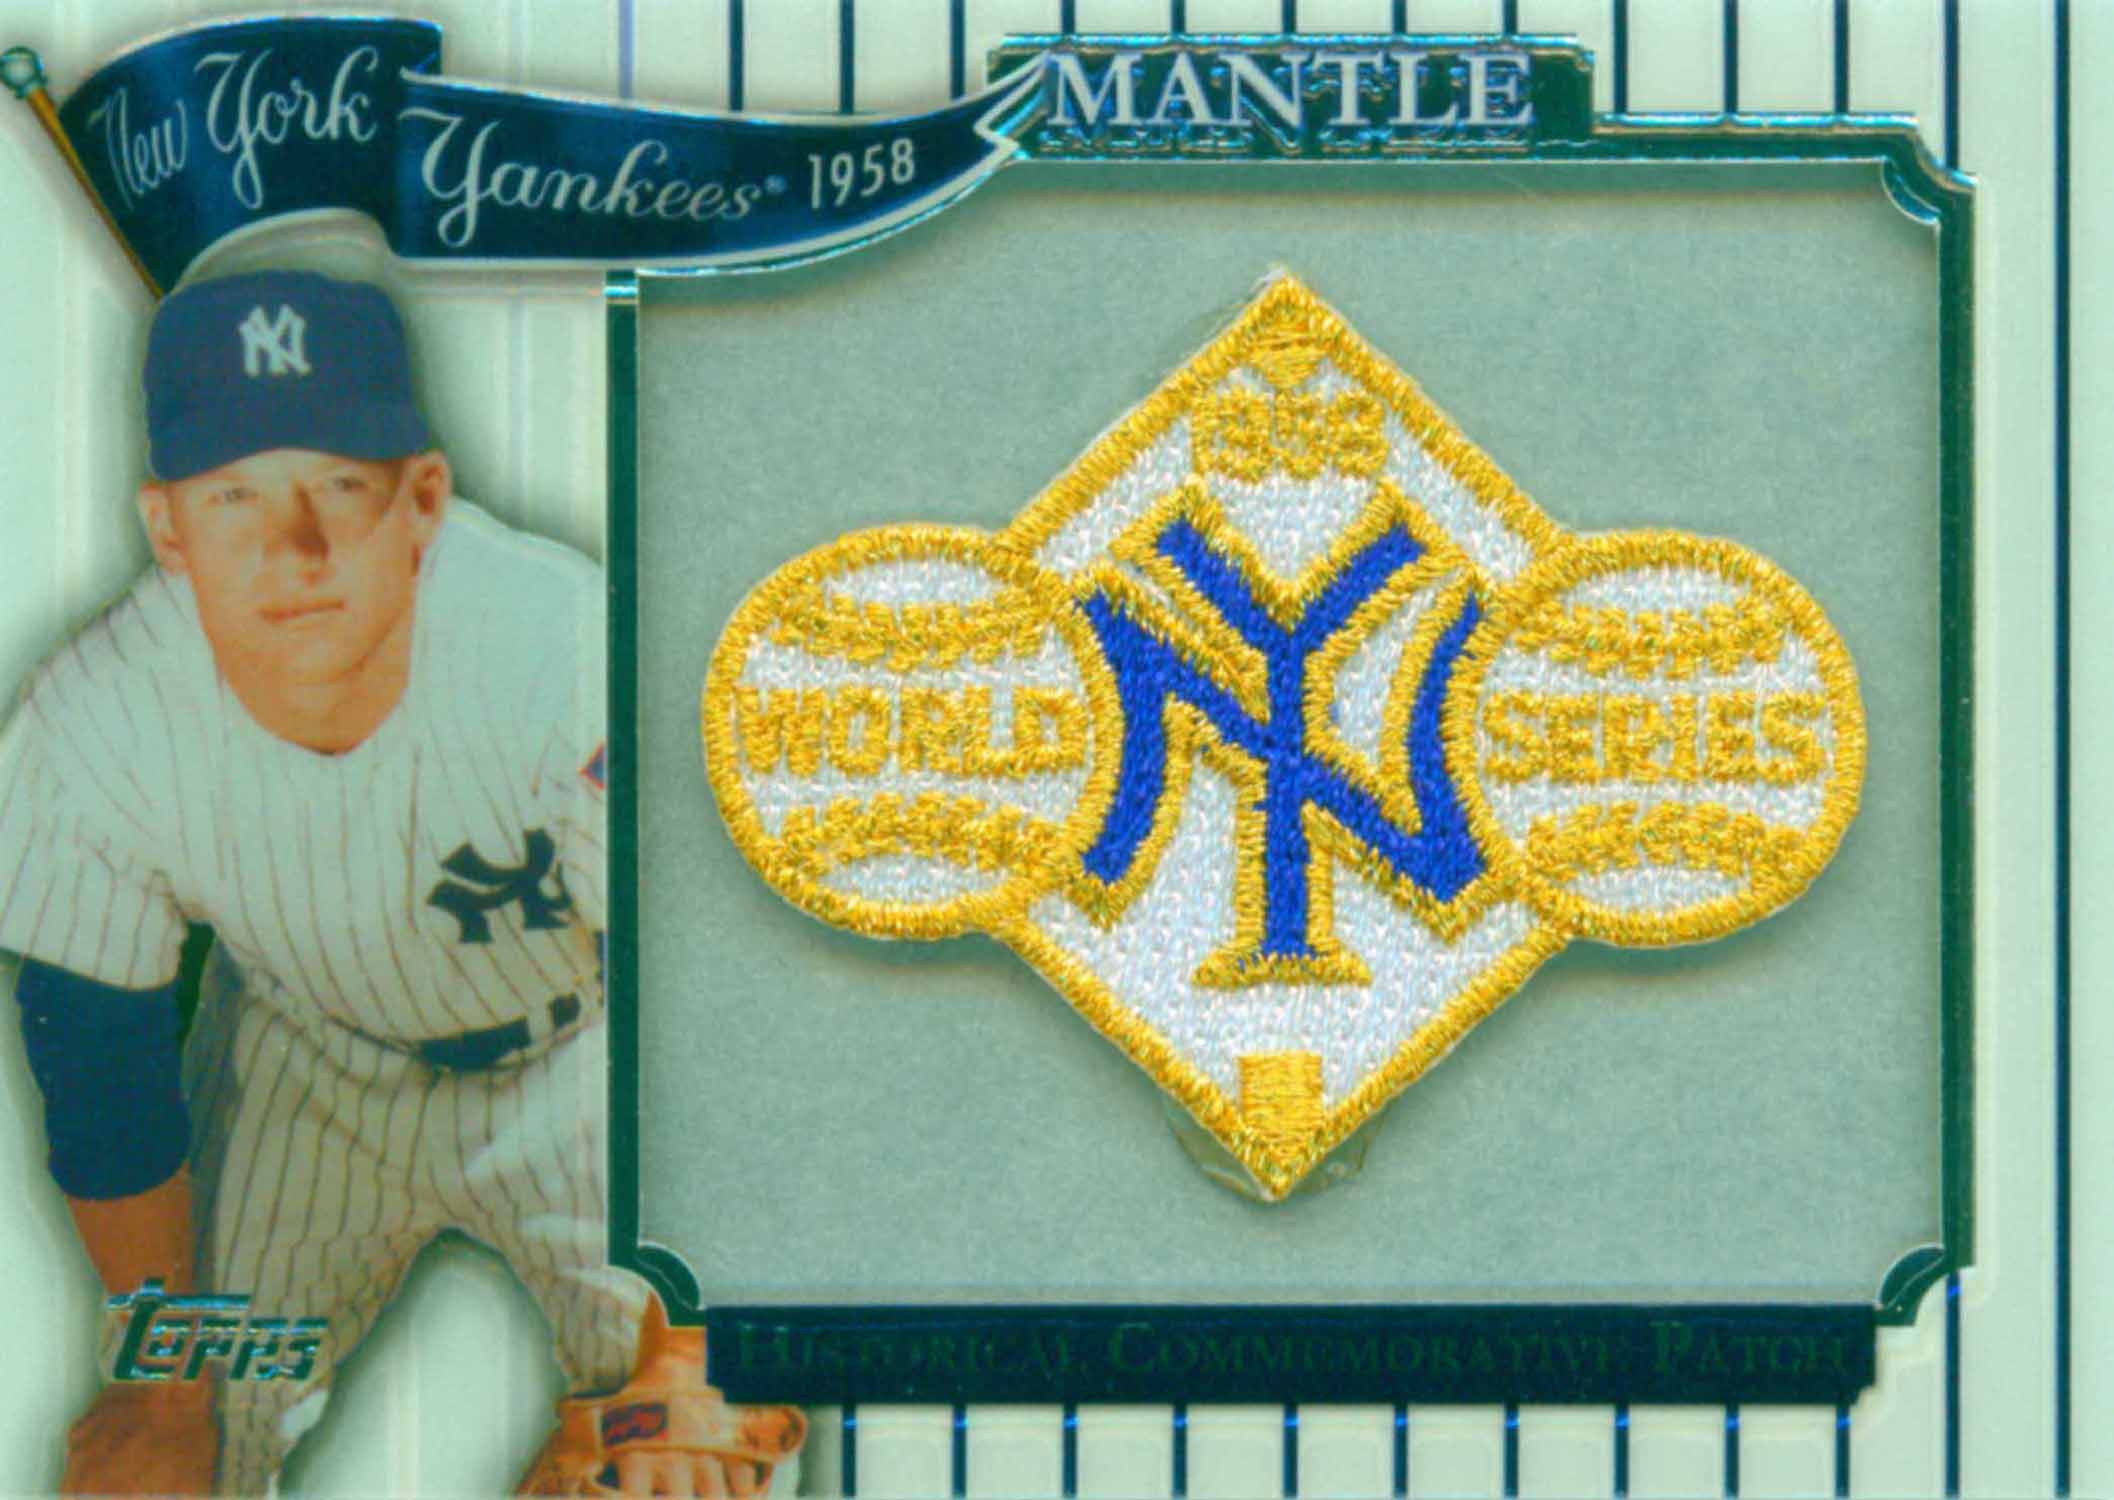 2009 Topps Factory Set Target Mantle World Series Patch